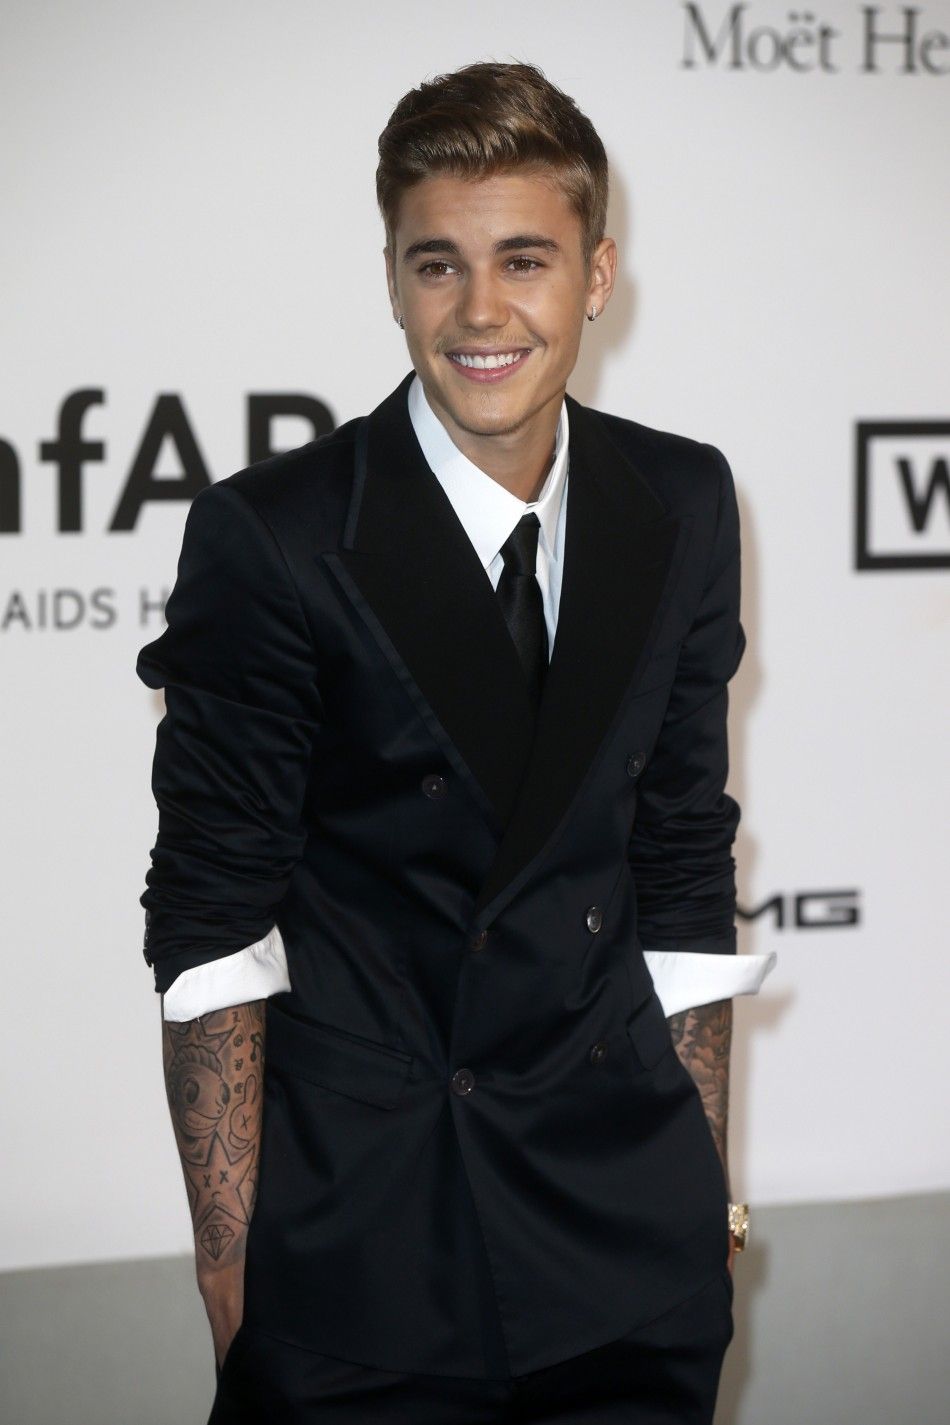 Justin Bieber Arrives for amfARs Cinema Against AIDS 2014 Event in Antibes During the 67th Cannes Film Festival